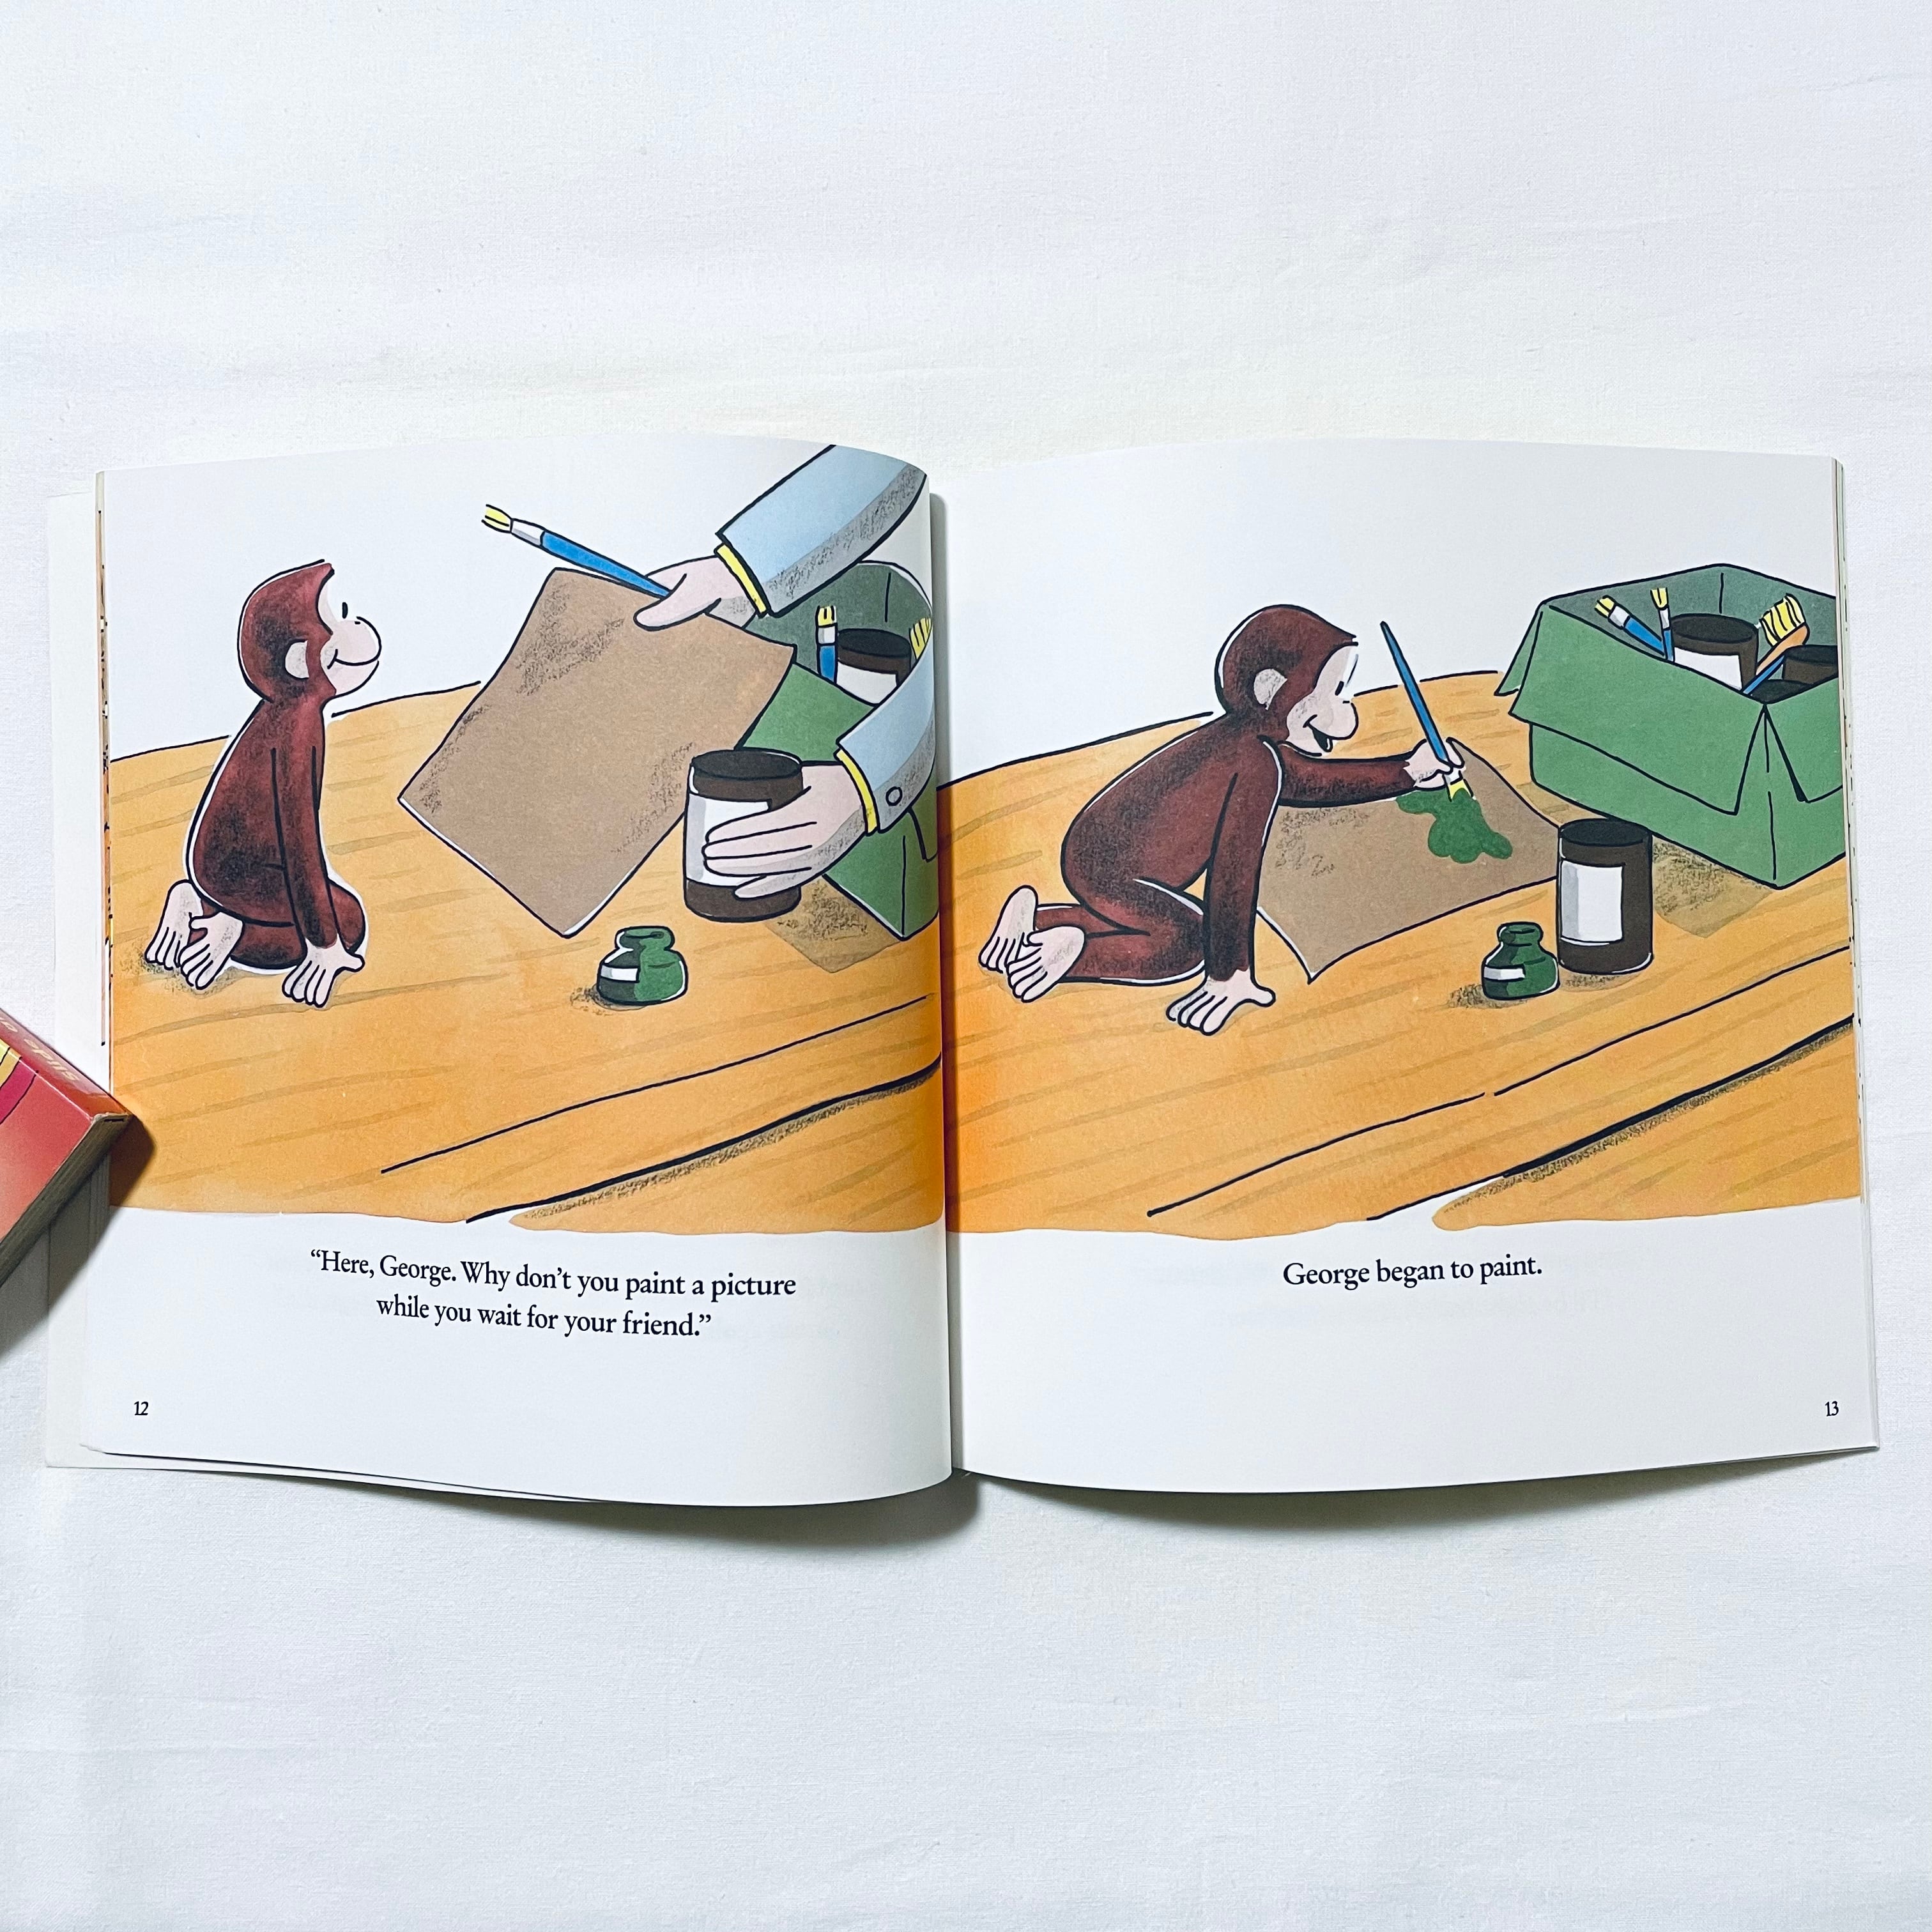 CURIOUS GEORGE GOES TO SCHOOL